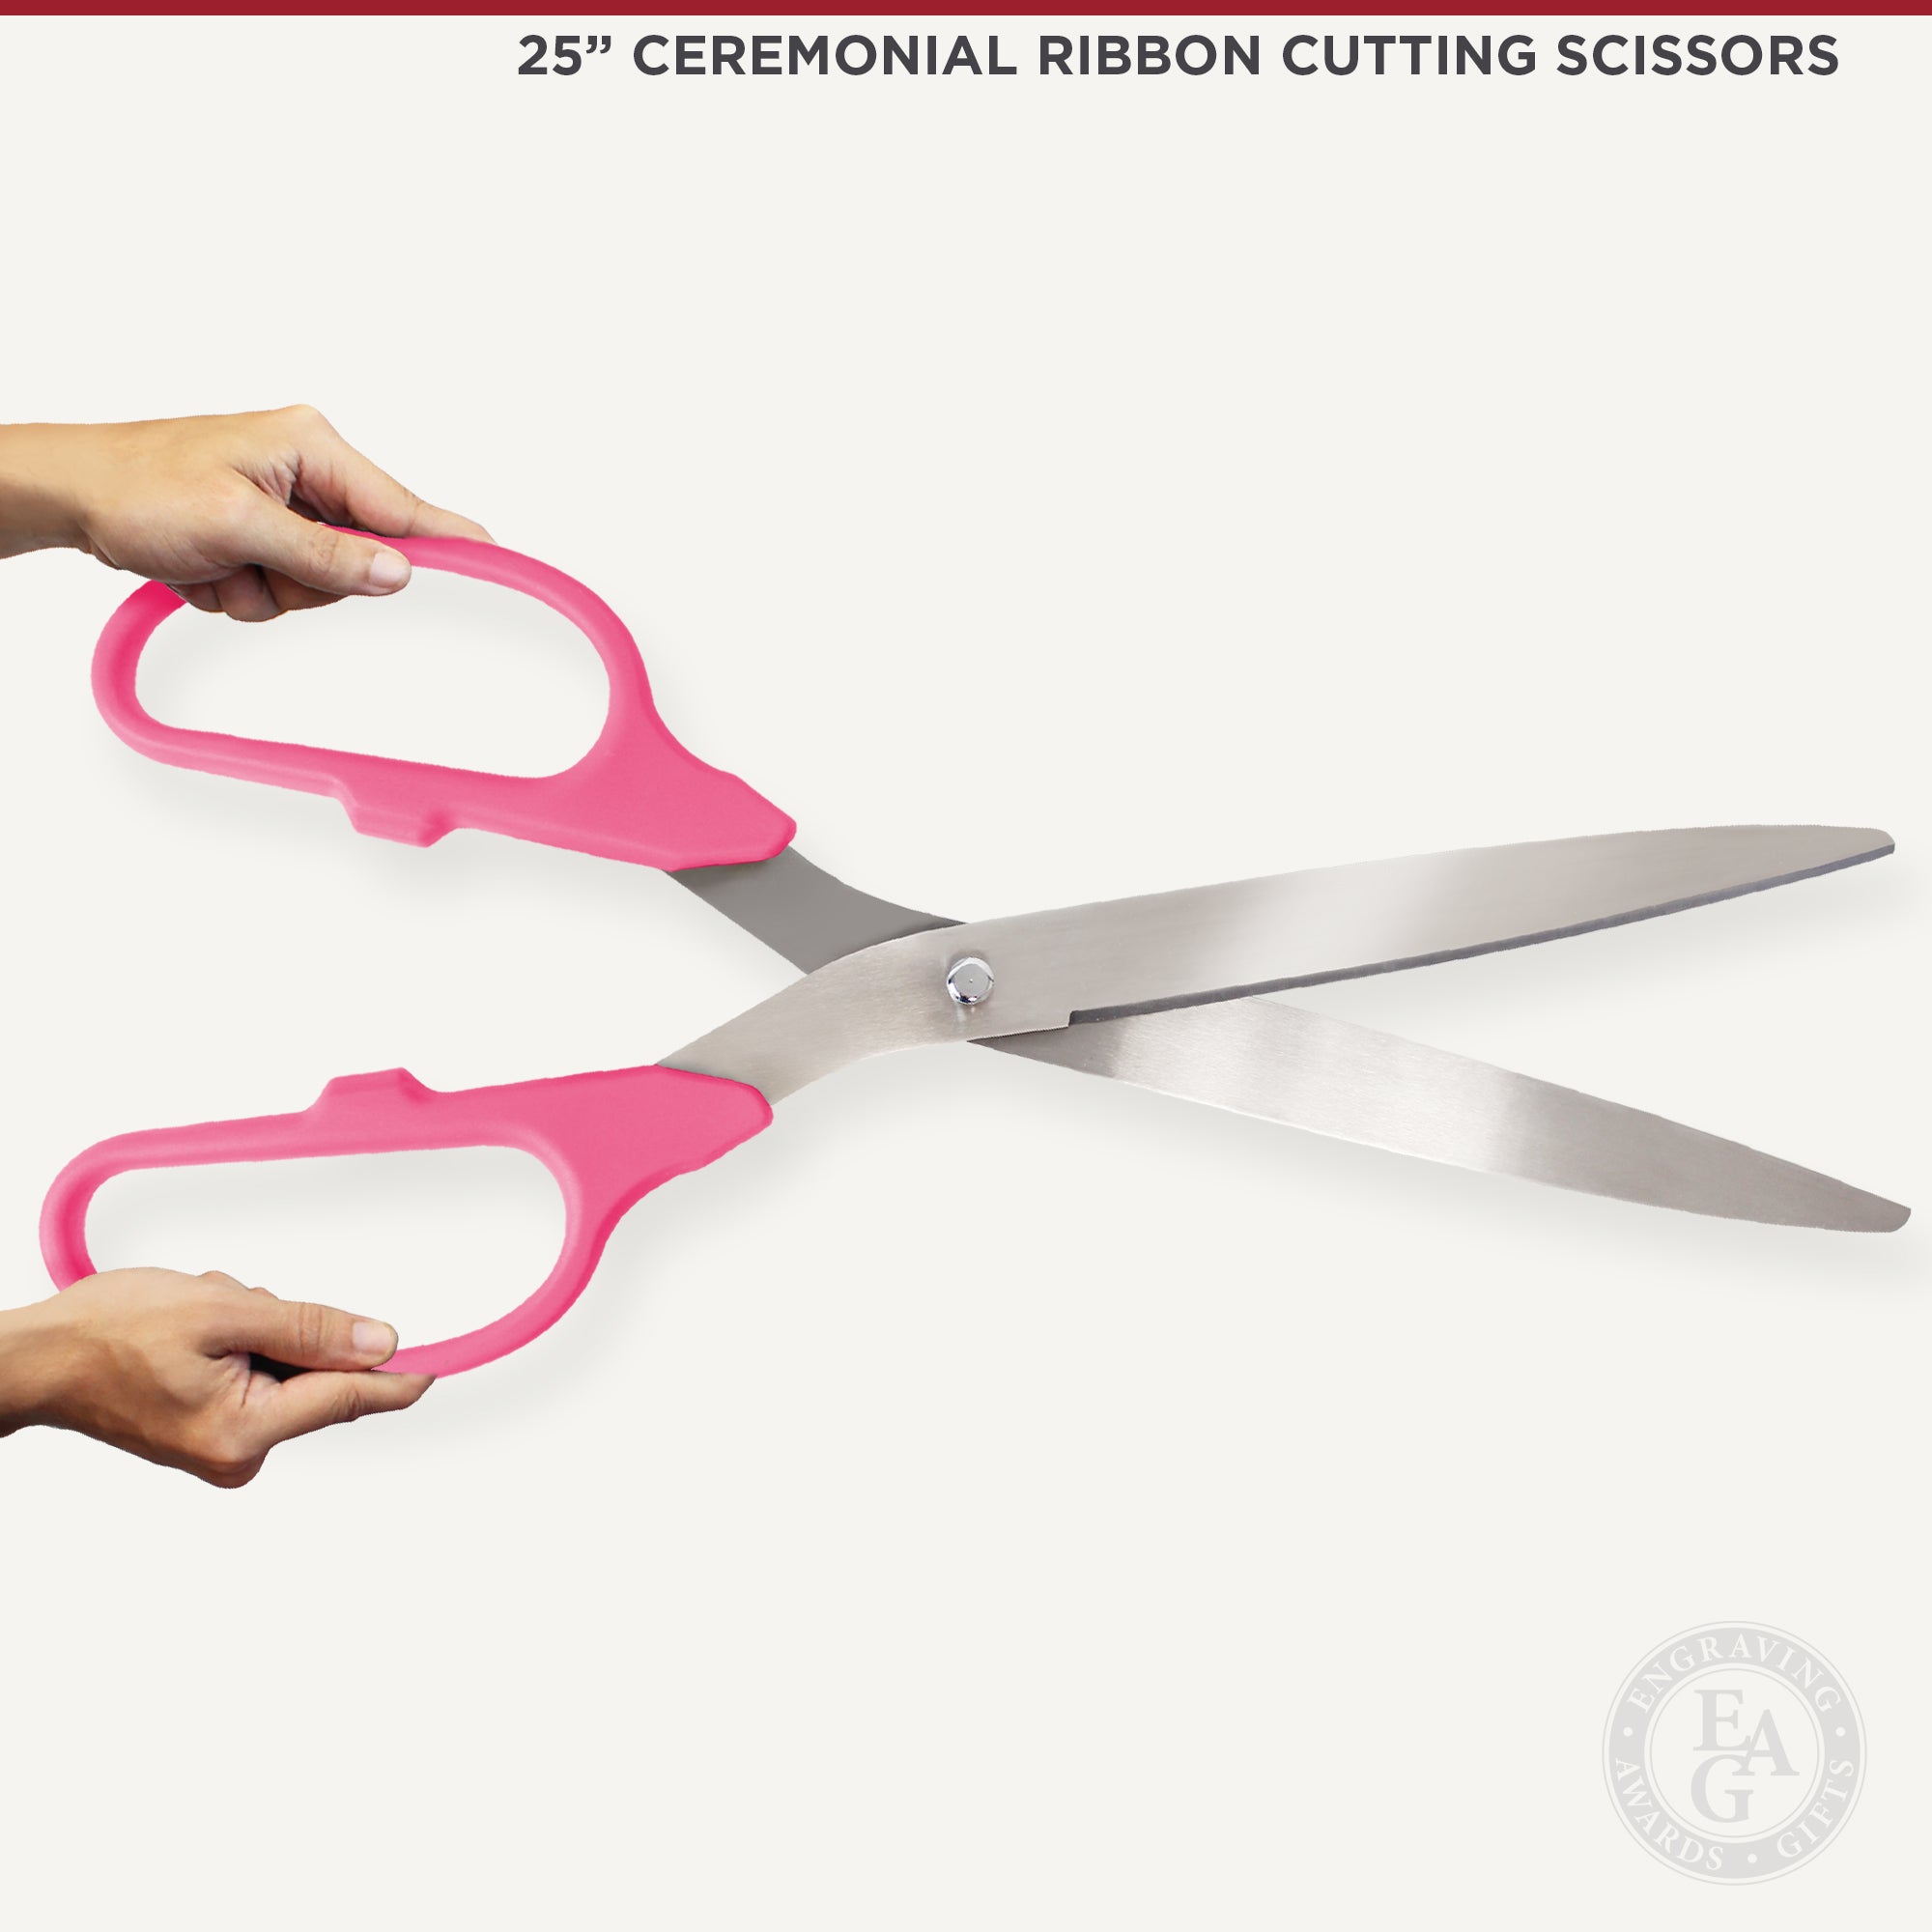 Deluxe Grand Opening Kit - 25 Ceremonial Scissors with Silver Blades -  Engraving, Awards & Gifts